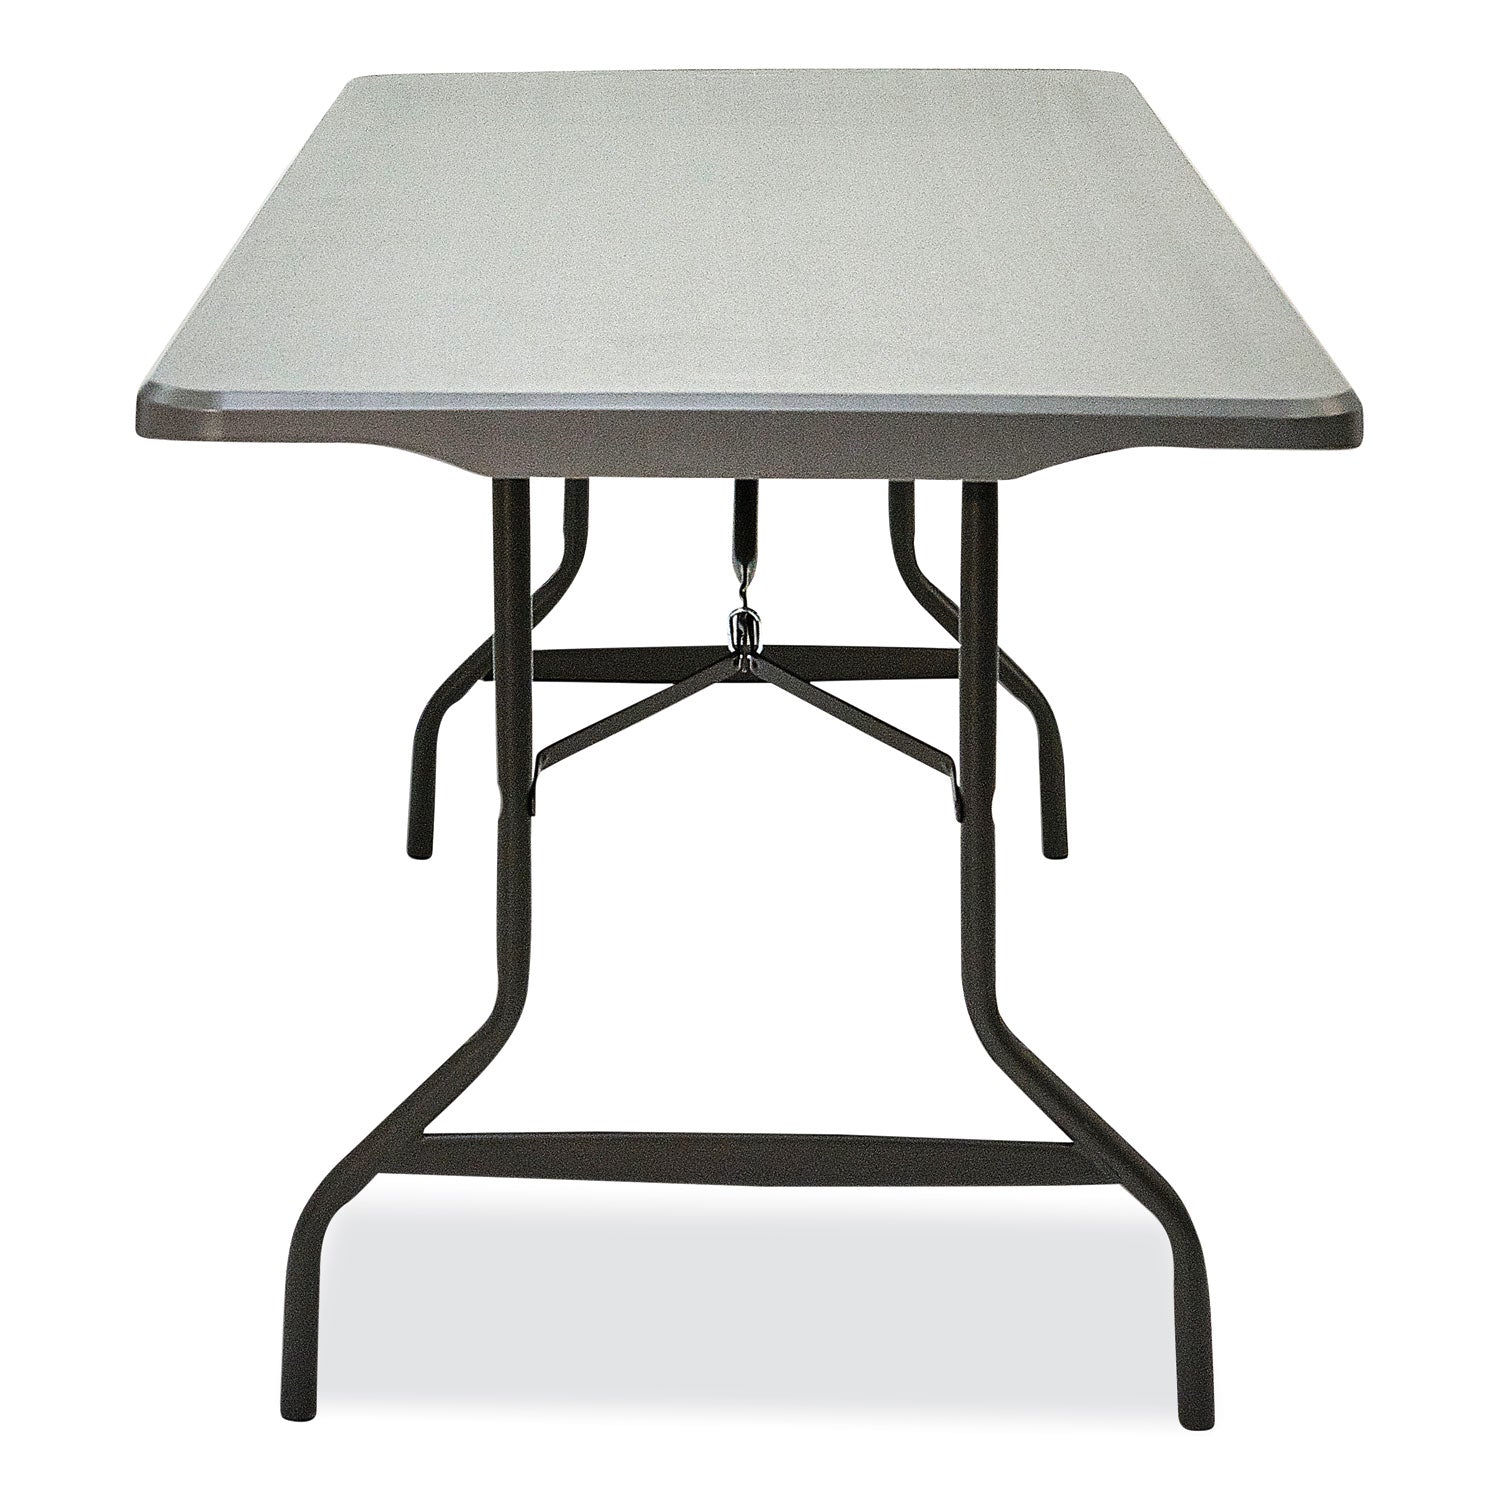 indestructable-commercial-folding-table-rectangular-72-x-30-x-29-charcoal-top-charcoal-base-legs_ice65527 - 3